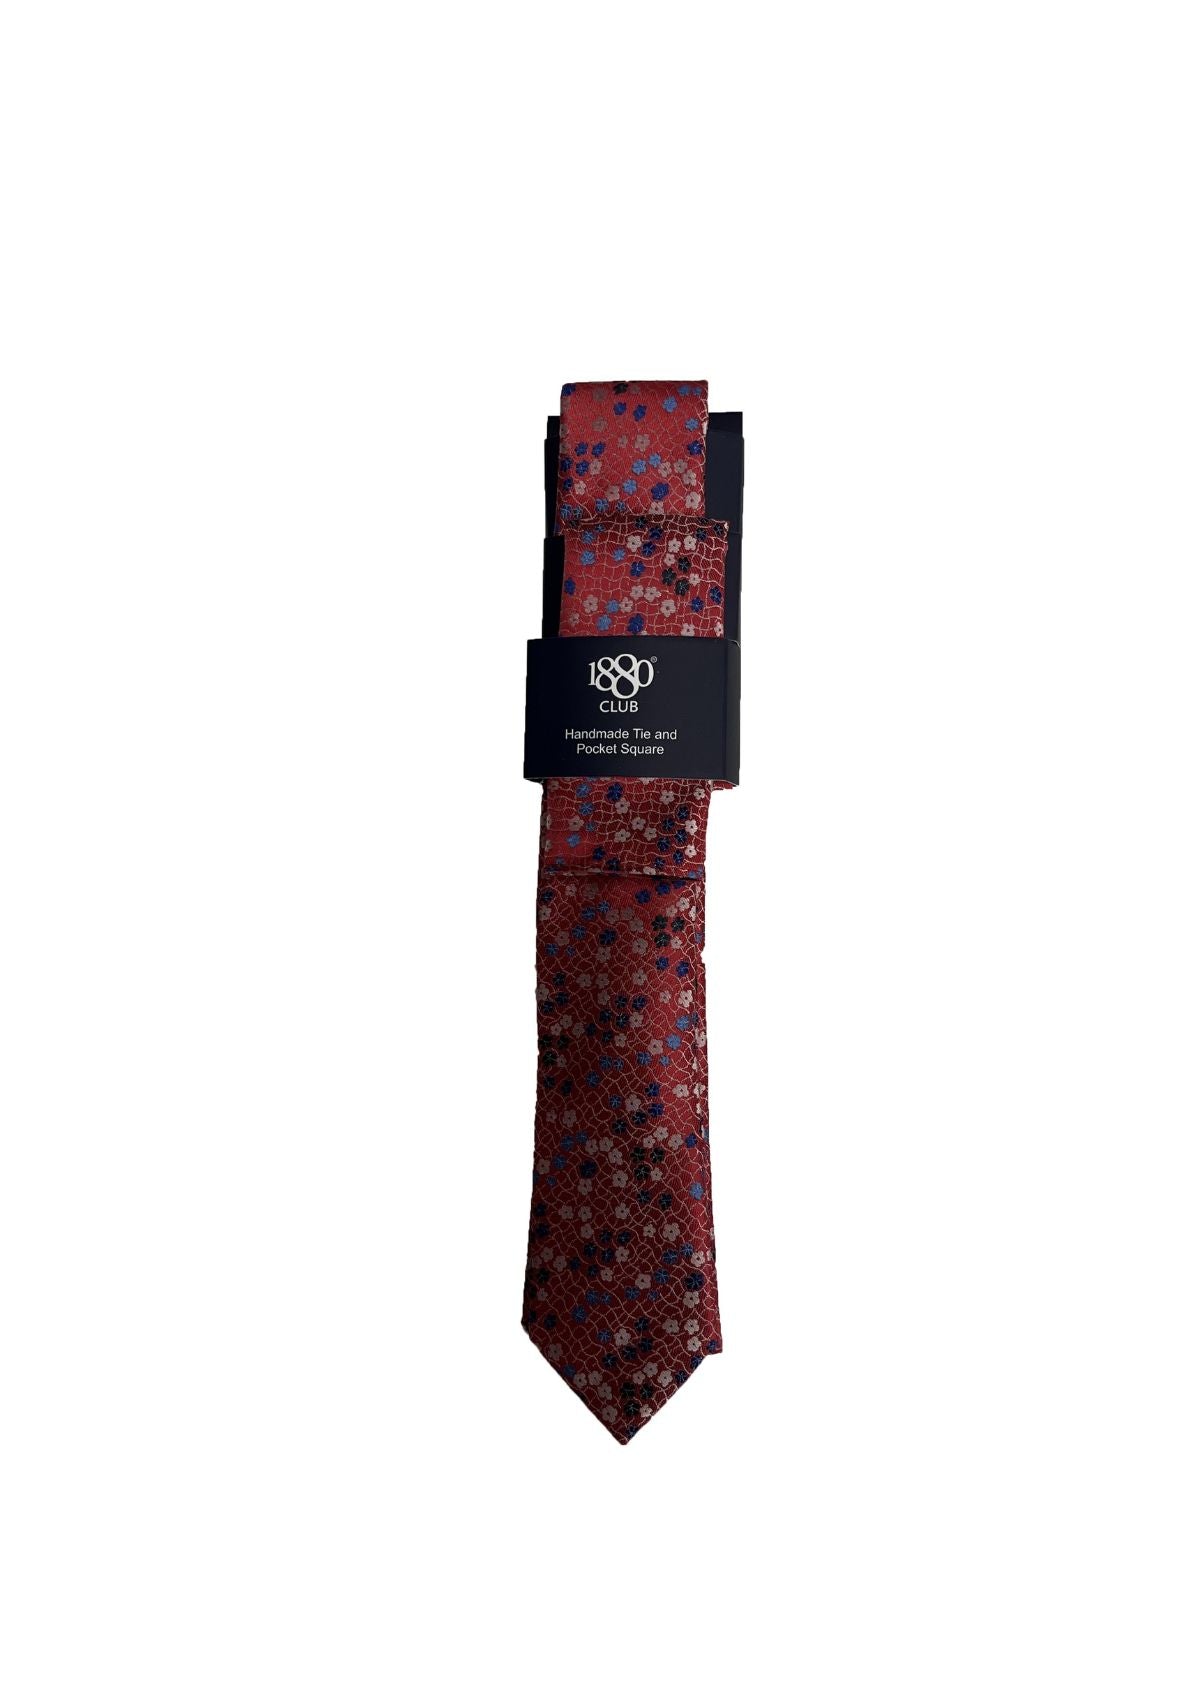 1880 Club Floral Red Tie and Pocket Square Set